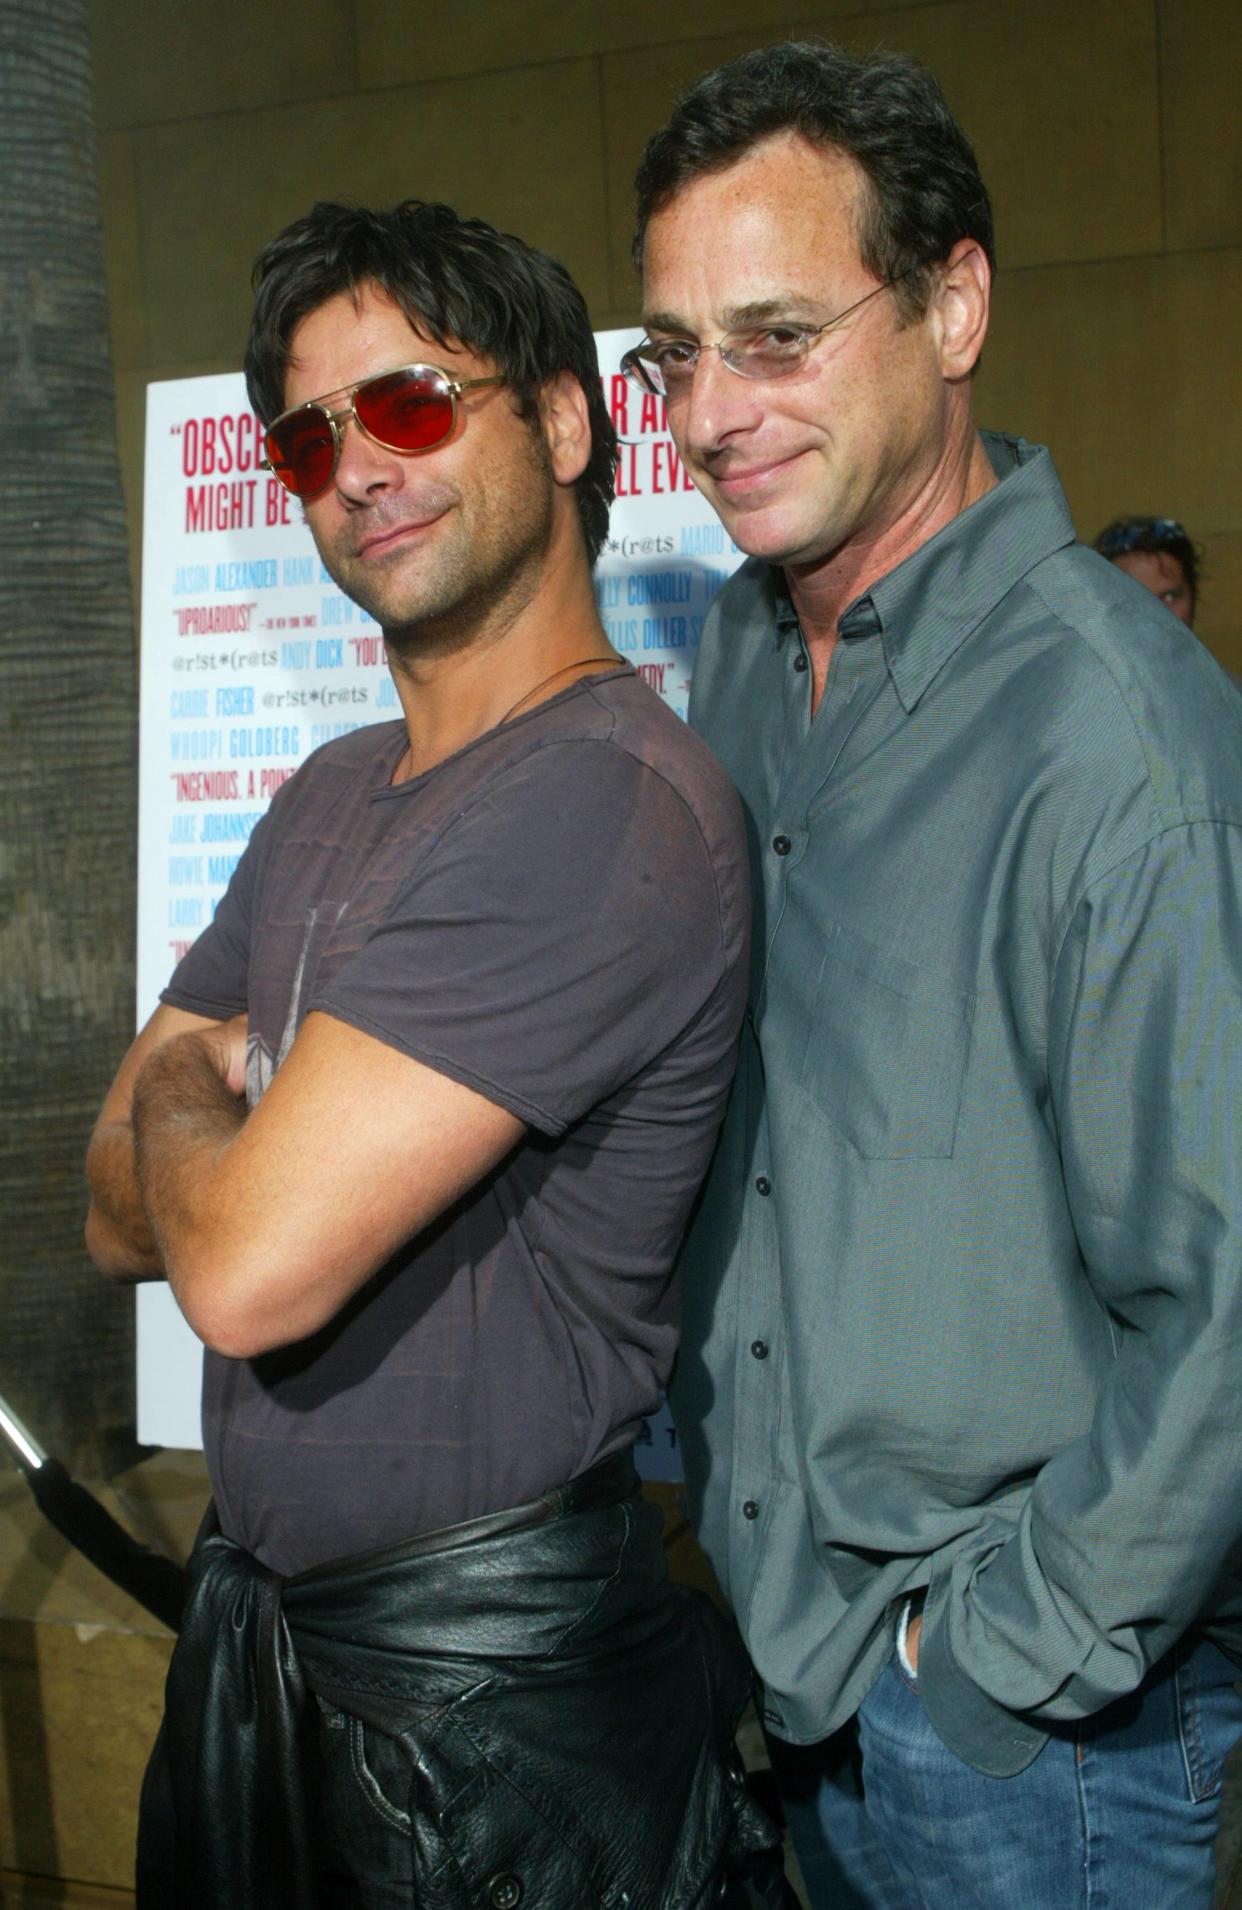 Actors John Stamos and Bob Saget arrive at the Los Angeles premiere of the "The Aristocrats" at The Egyptian Theatre in Hollywood, Calif. on July 20, 2005.